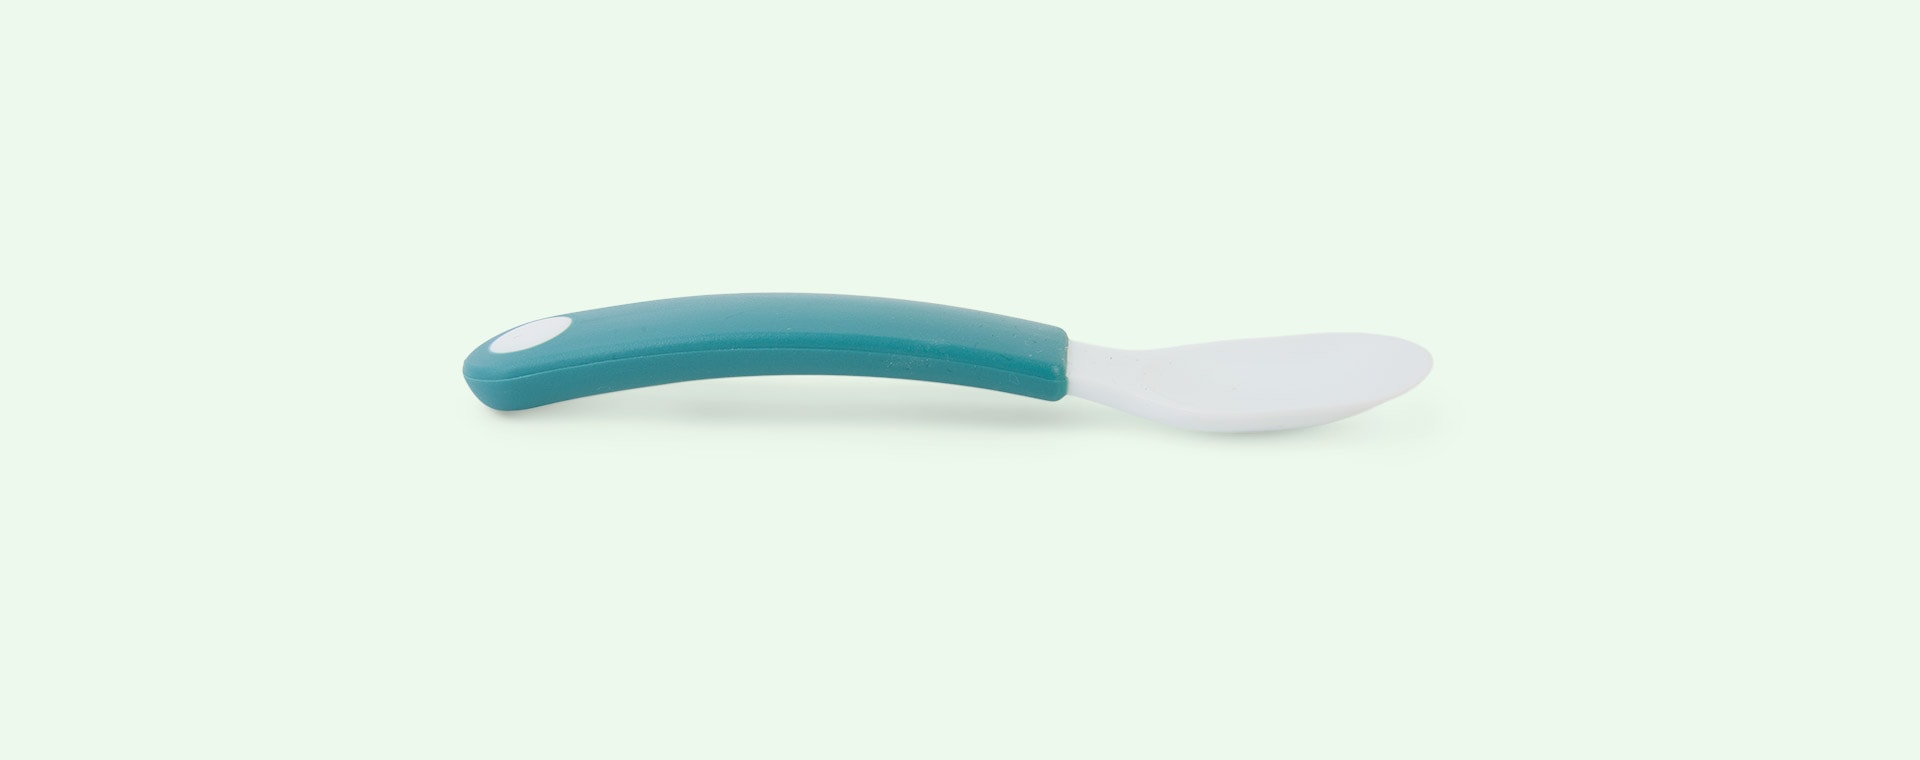 Deep Turquoise Mepal 2-Pack Trainer Spoon Set Mio